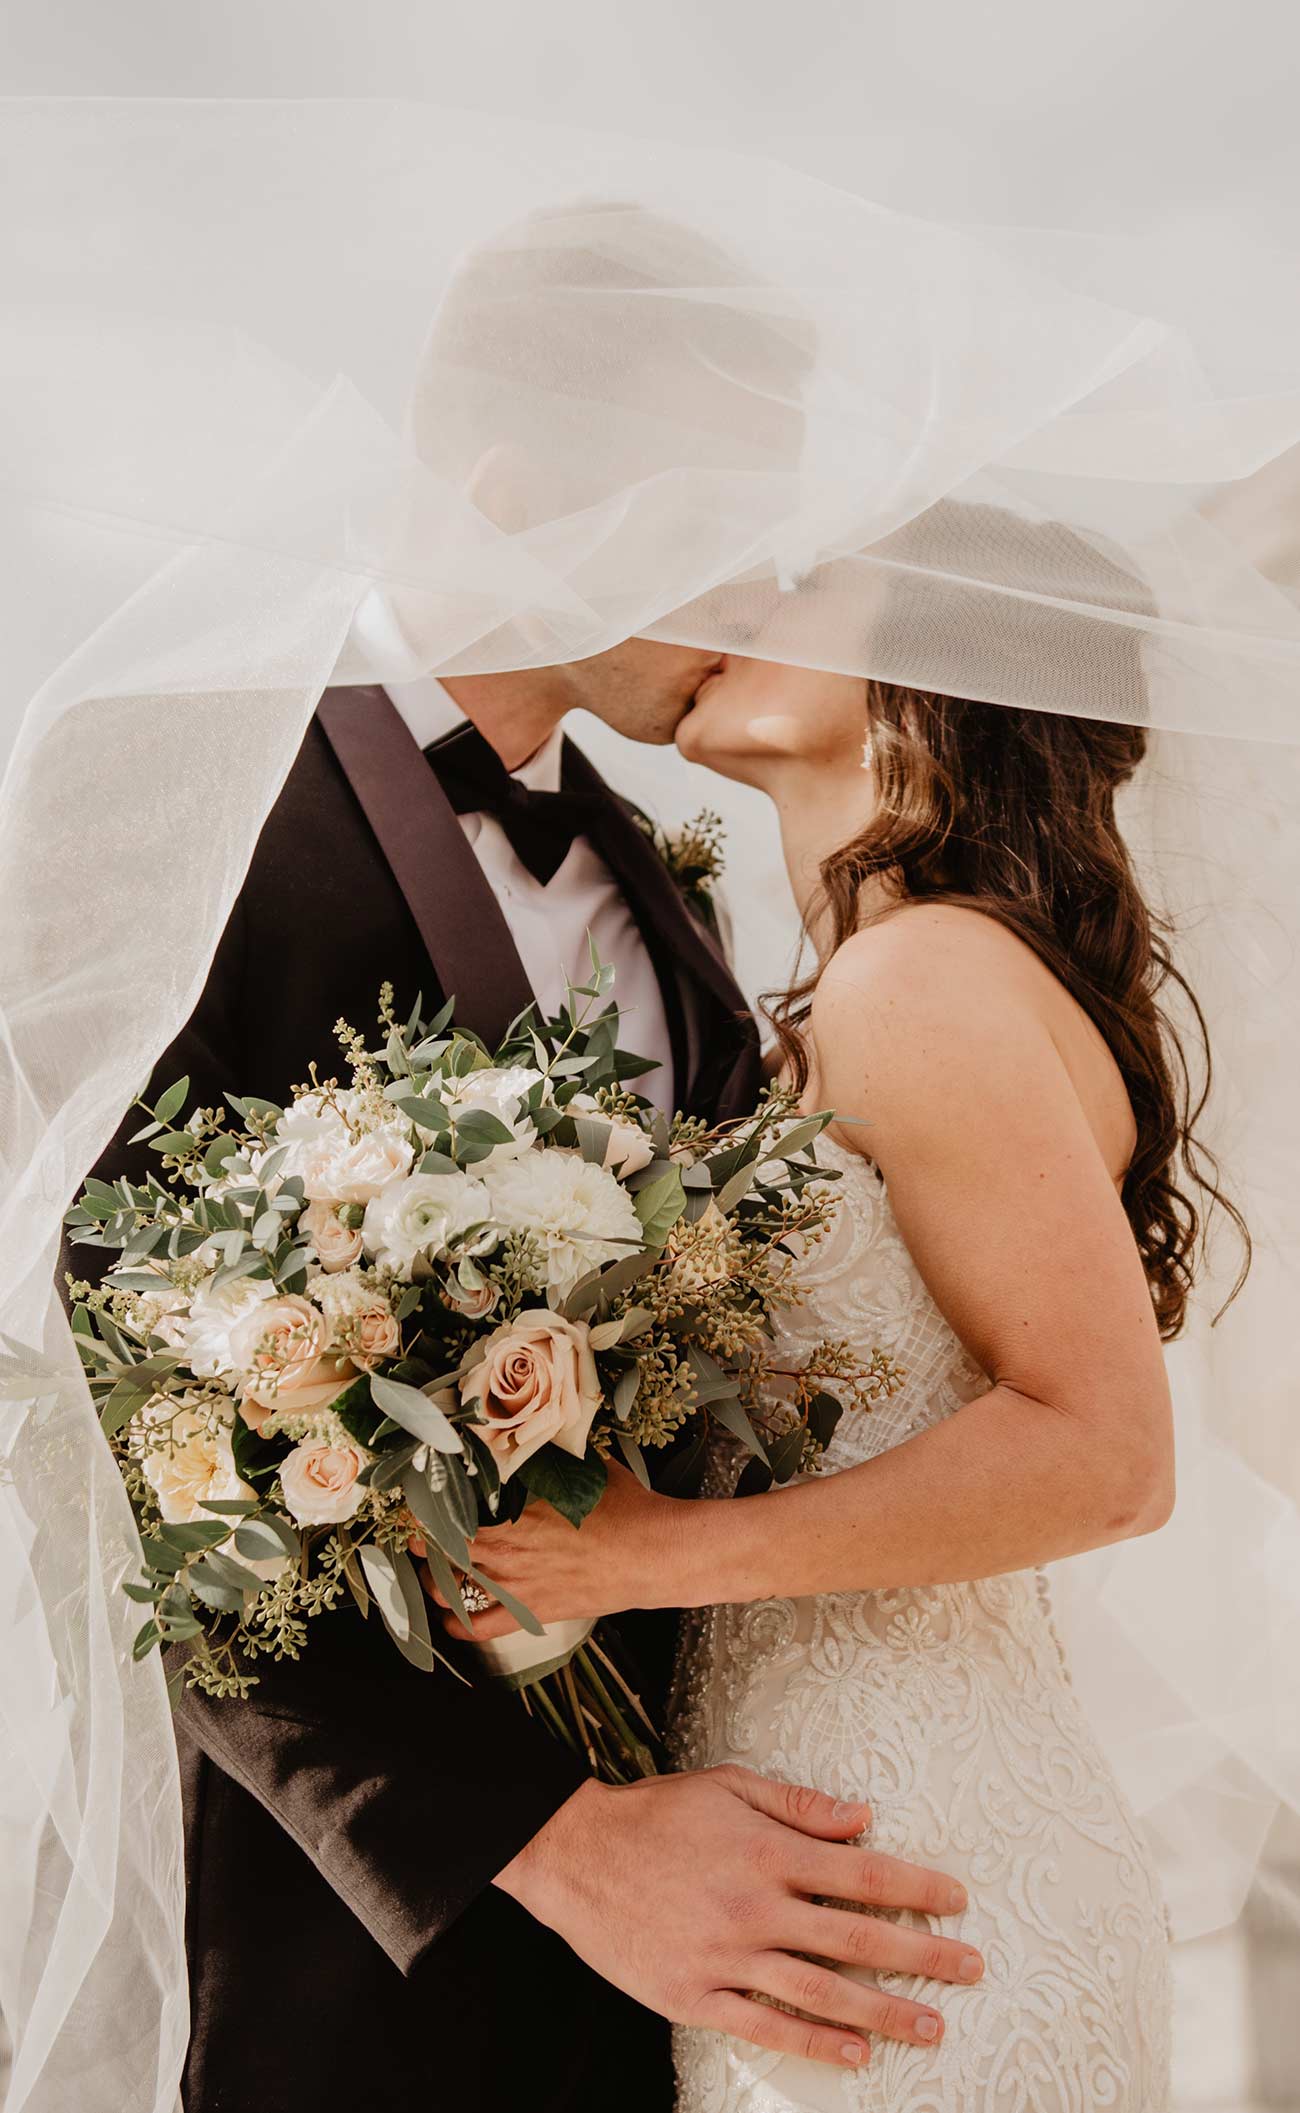 A bride and groom kissing under the veil